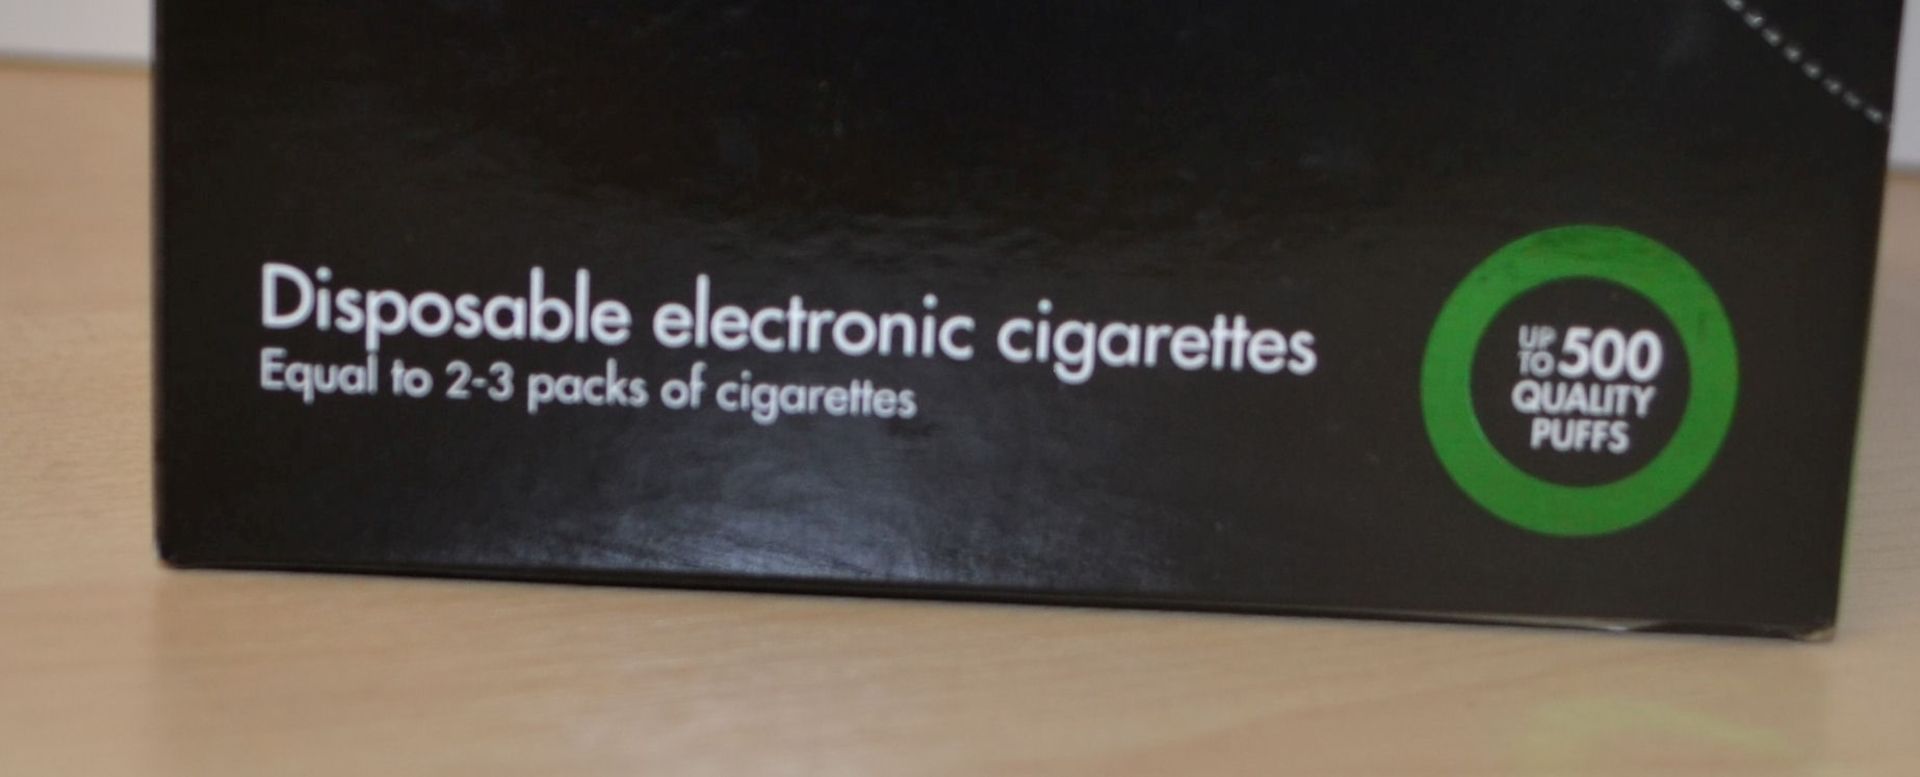 24 x Neo E-Cigarettes Cool Mint Disposable Electronic Cigarettes - New & Sealed Stock - CL185 - Ref: - Image 3 of 8